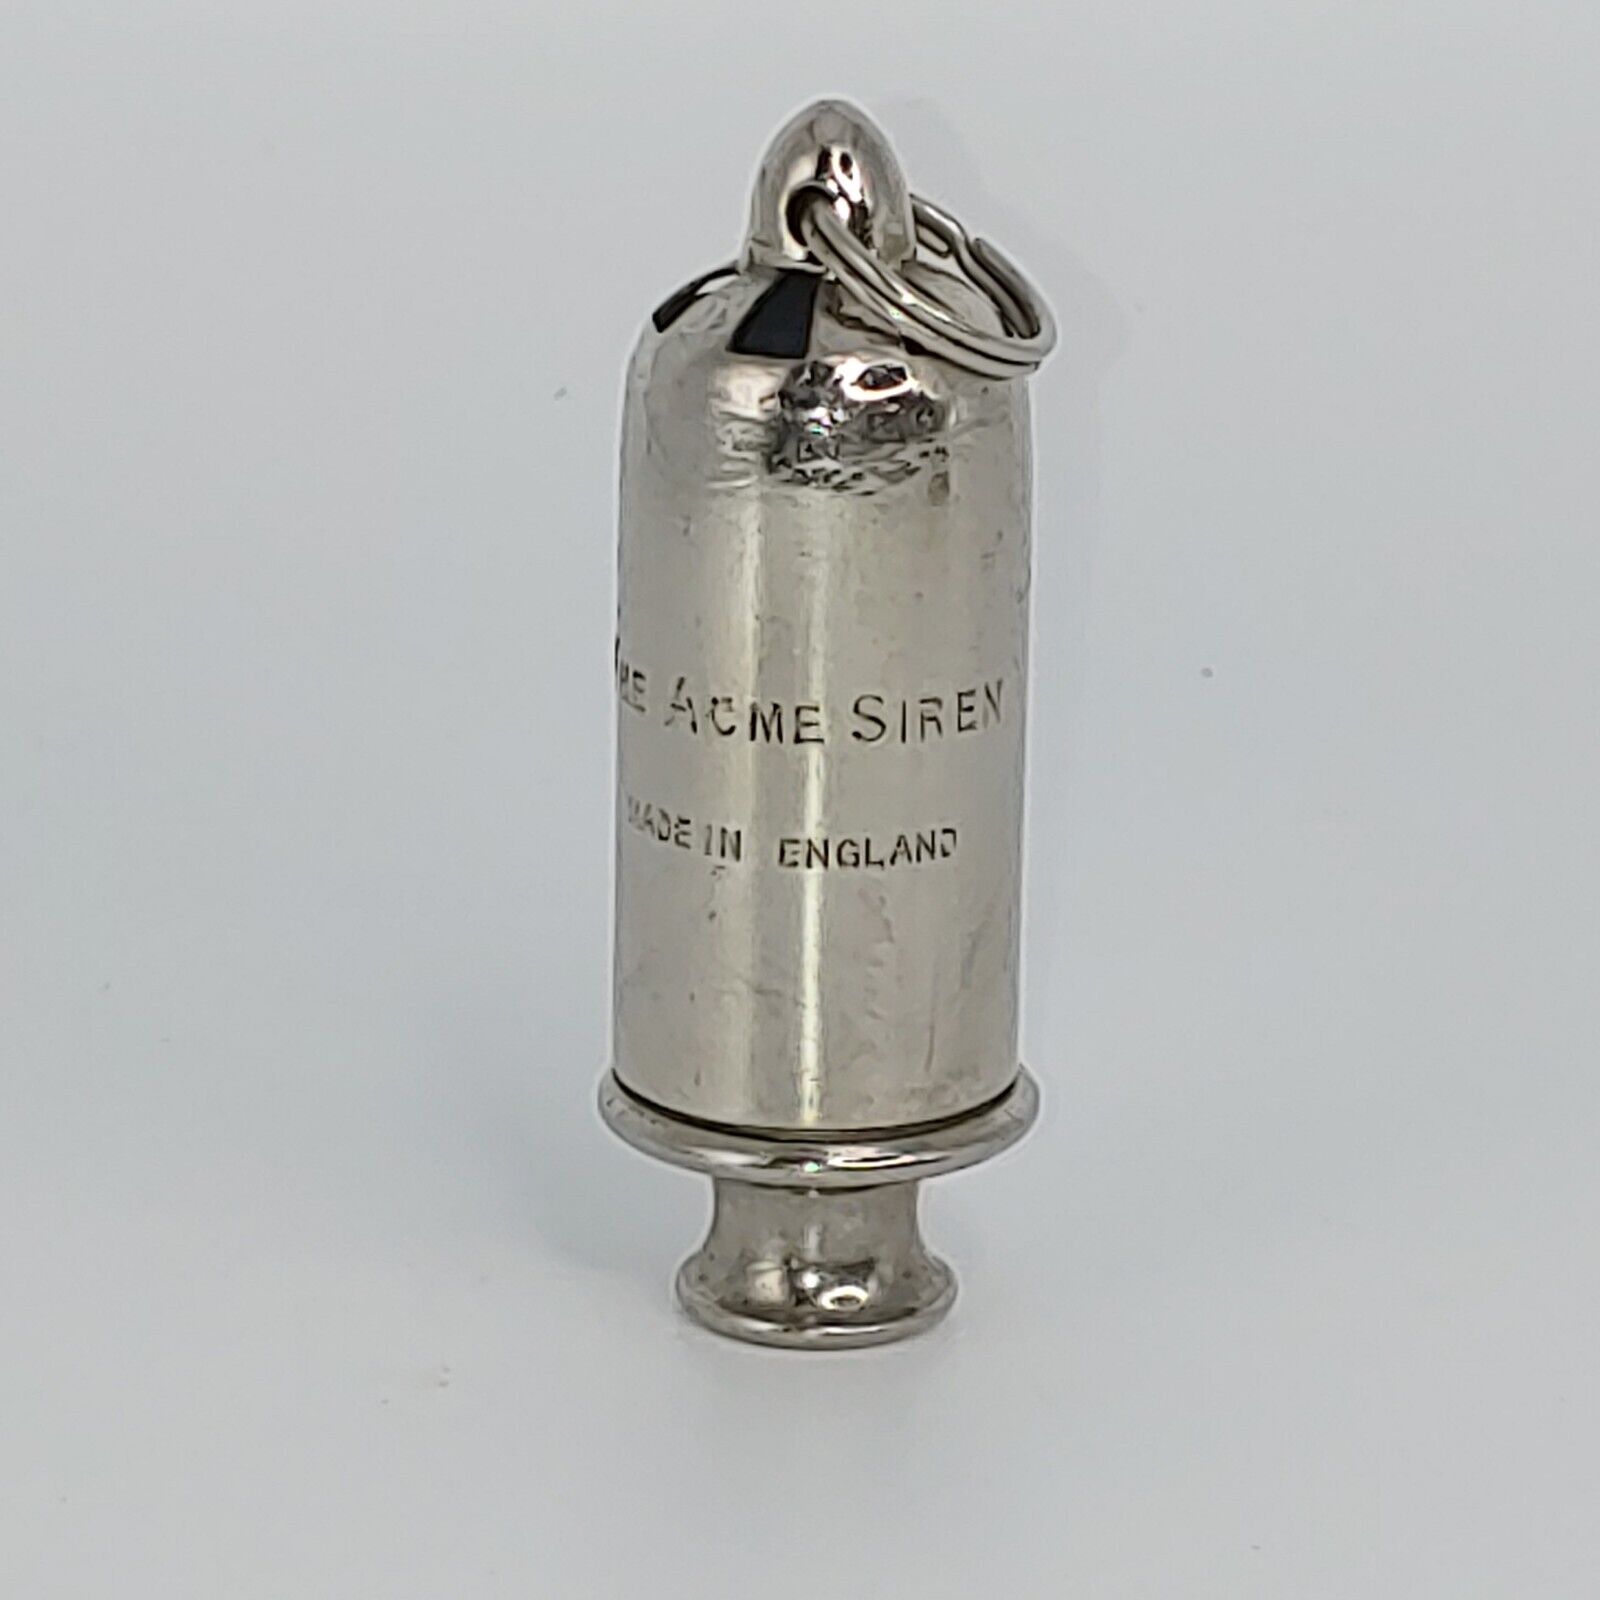 Vintage The Acme Siren Whistle Made in England Works